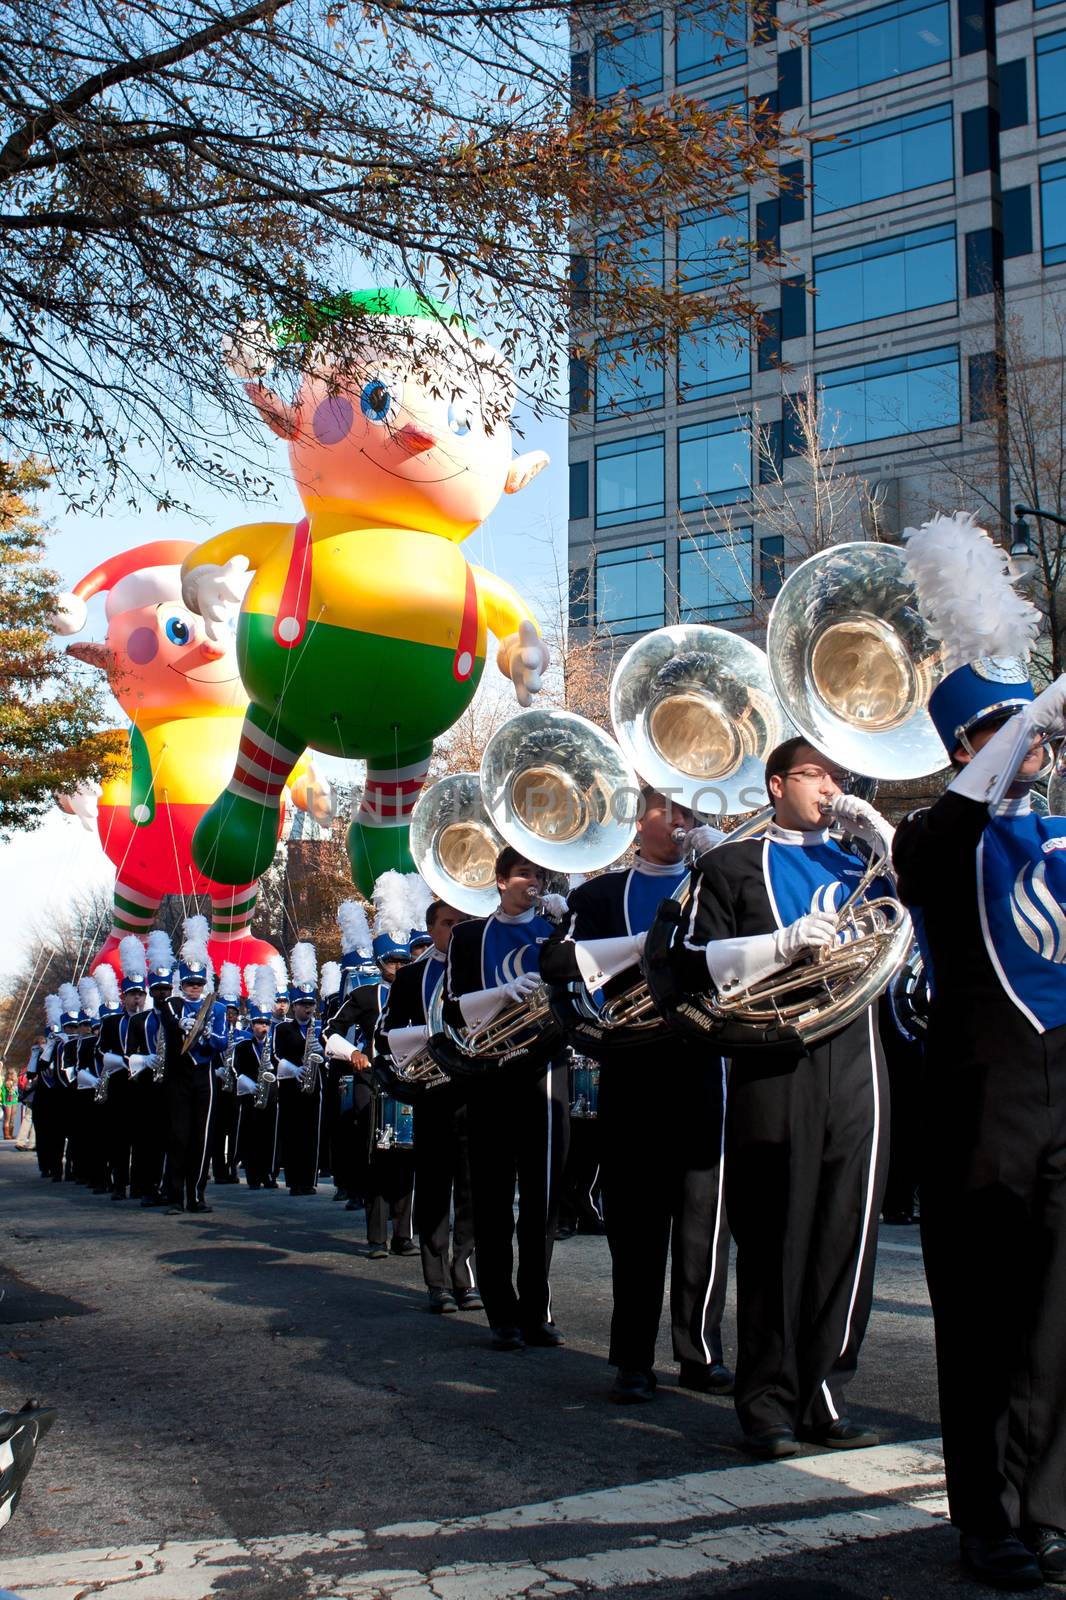 Atlanta, GA, USA - December 1, 2012:  The Georgia State University band plays as floats hover in the background, at the start of the annual Atlanta Christmas parade in downtown Atlanta.